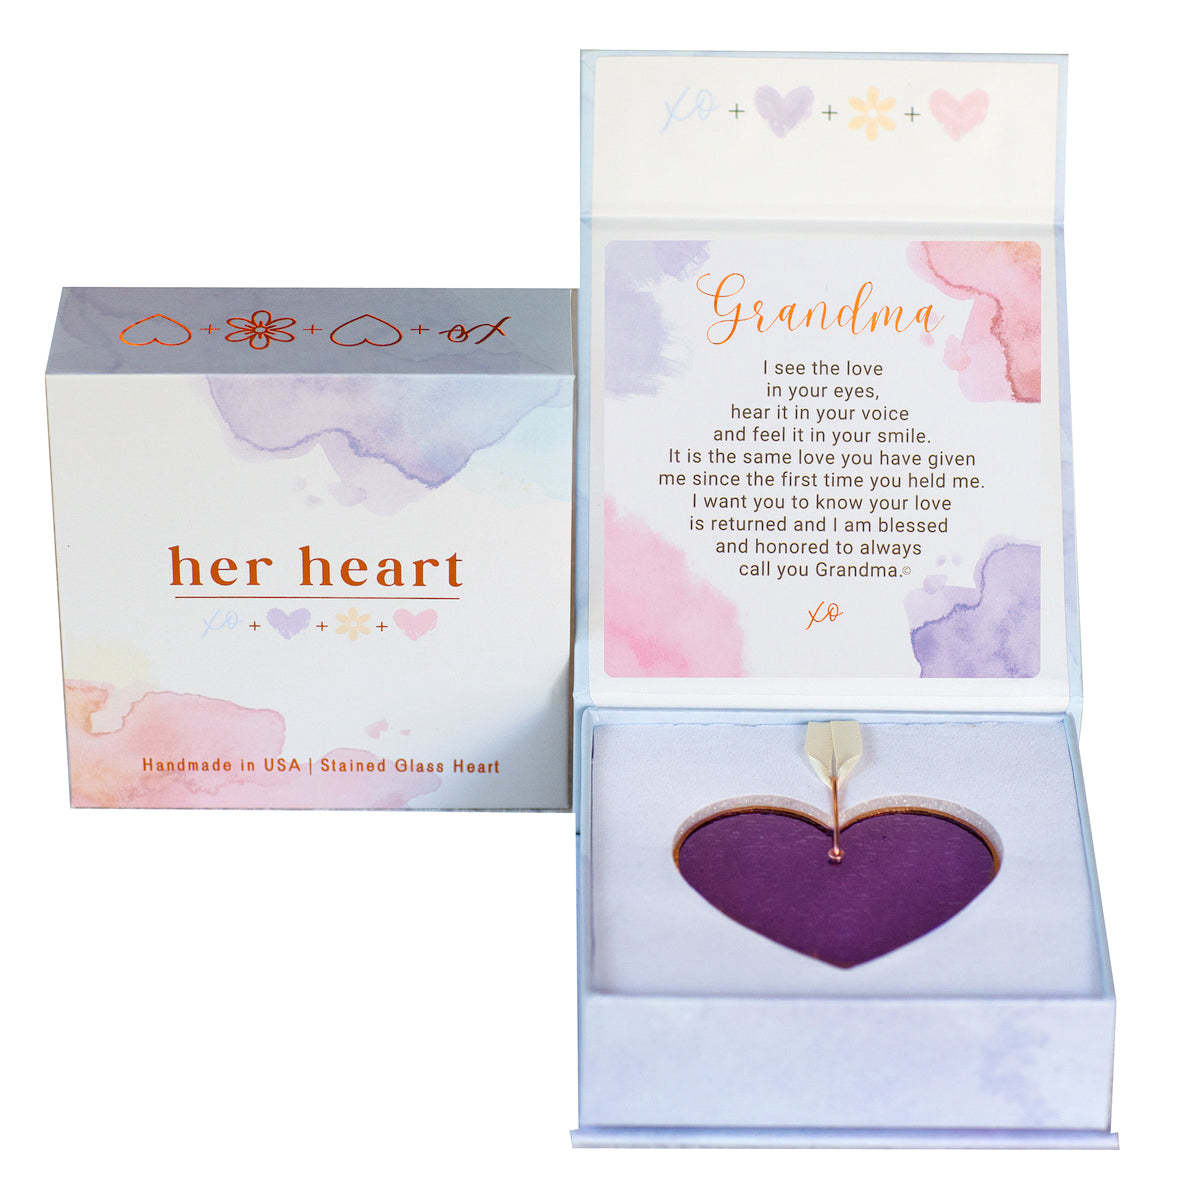 Her Heart for Grandma gift box shown closed and open.  Open box features sentiment card and heart resting in foam cushion.